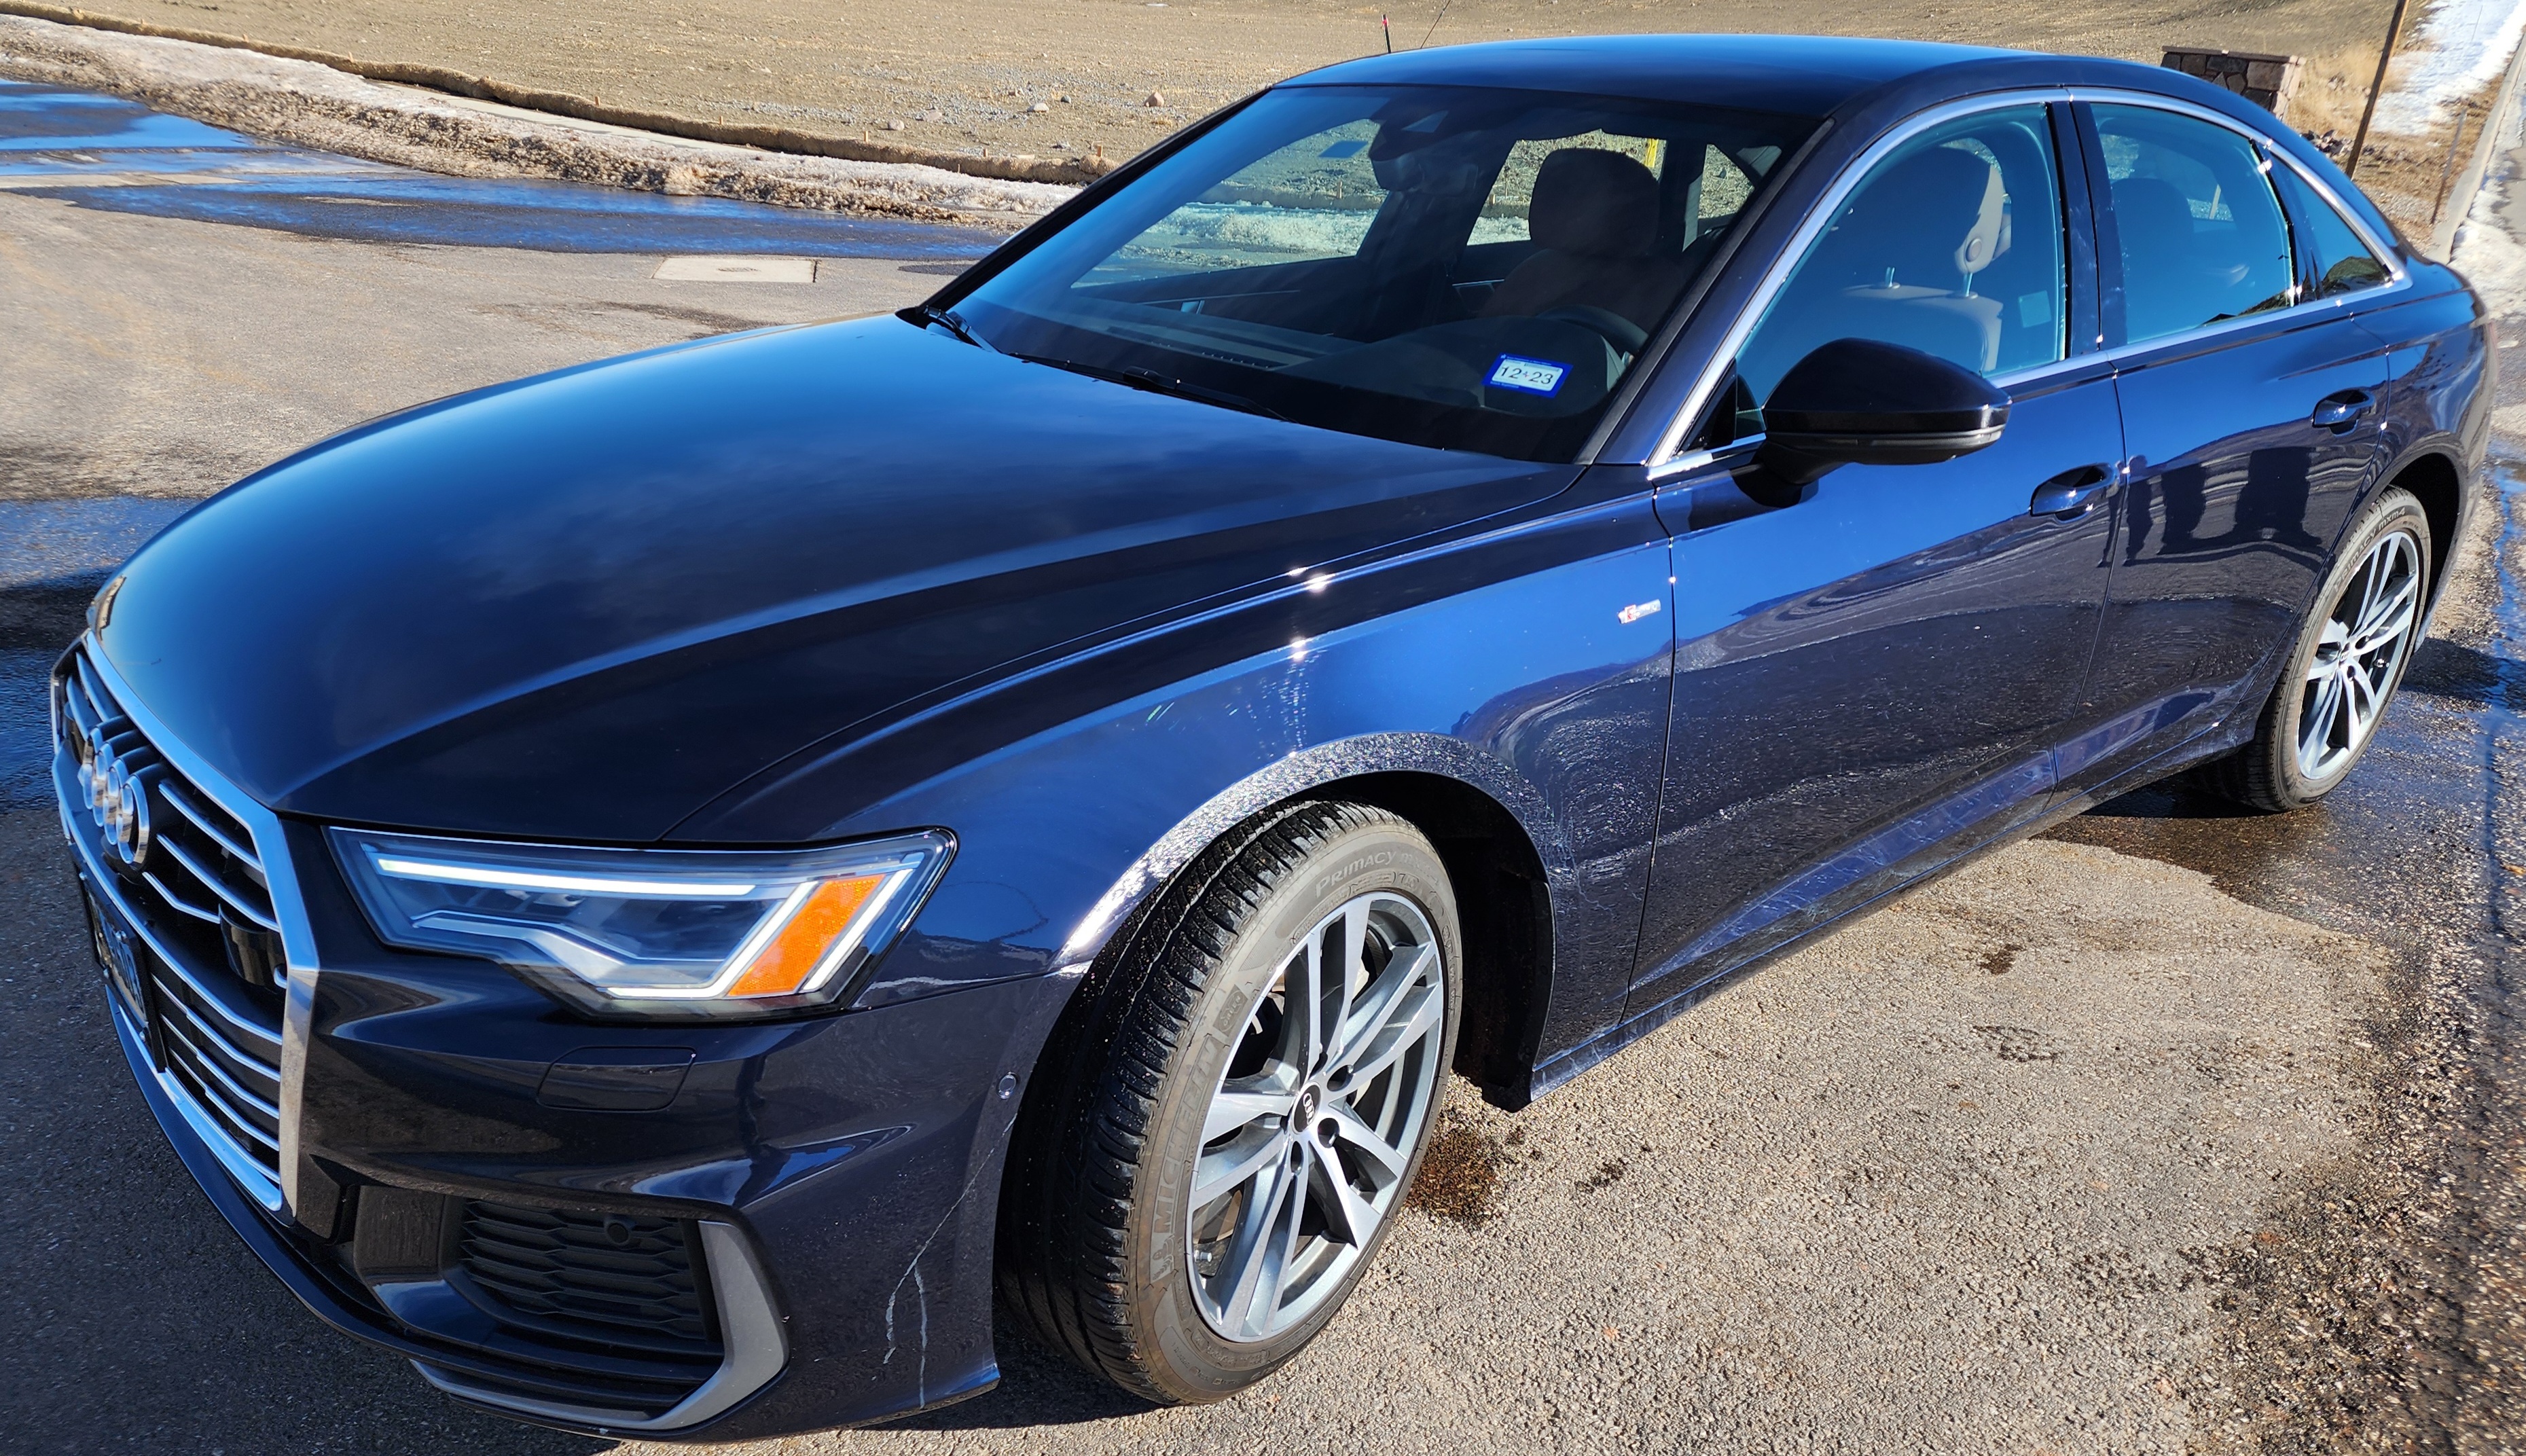 2018 vs. 2019 Audi A6: What's the Difference? - Autotrader